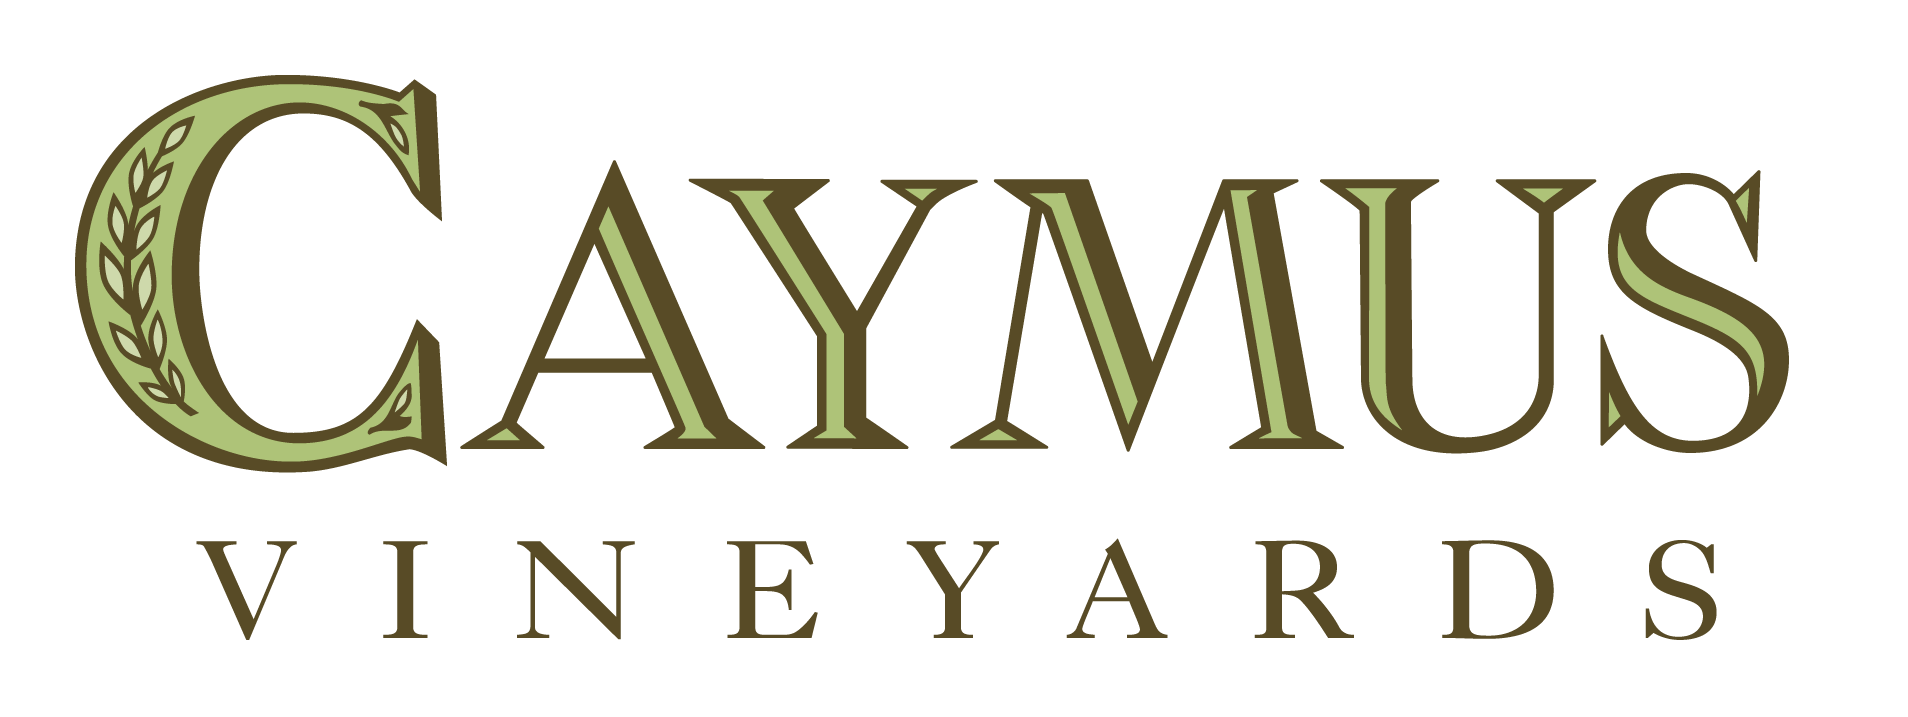 04Caymus_Logo-2.png